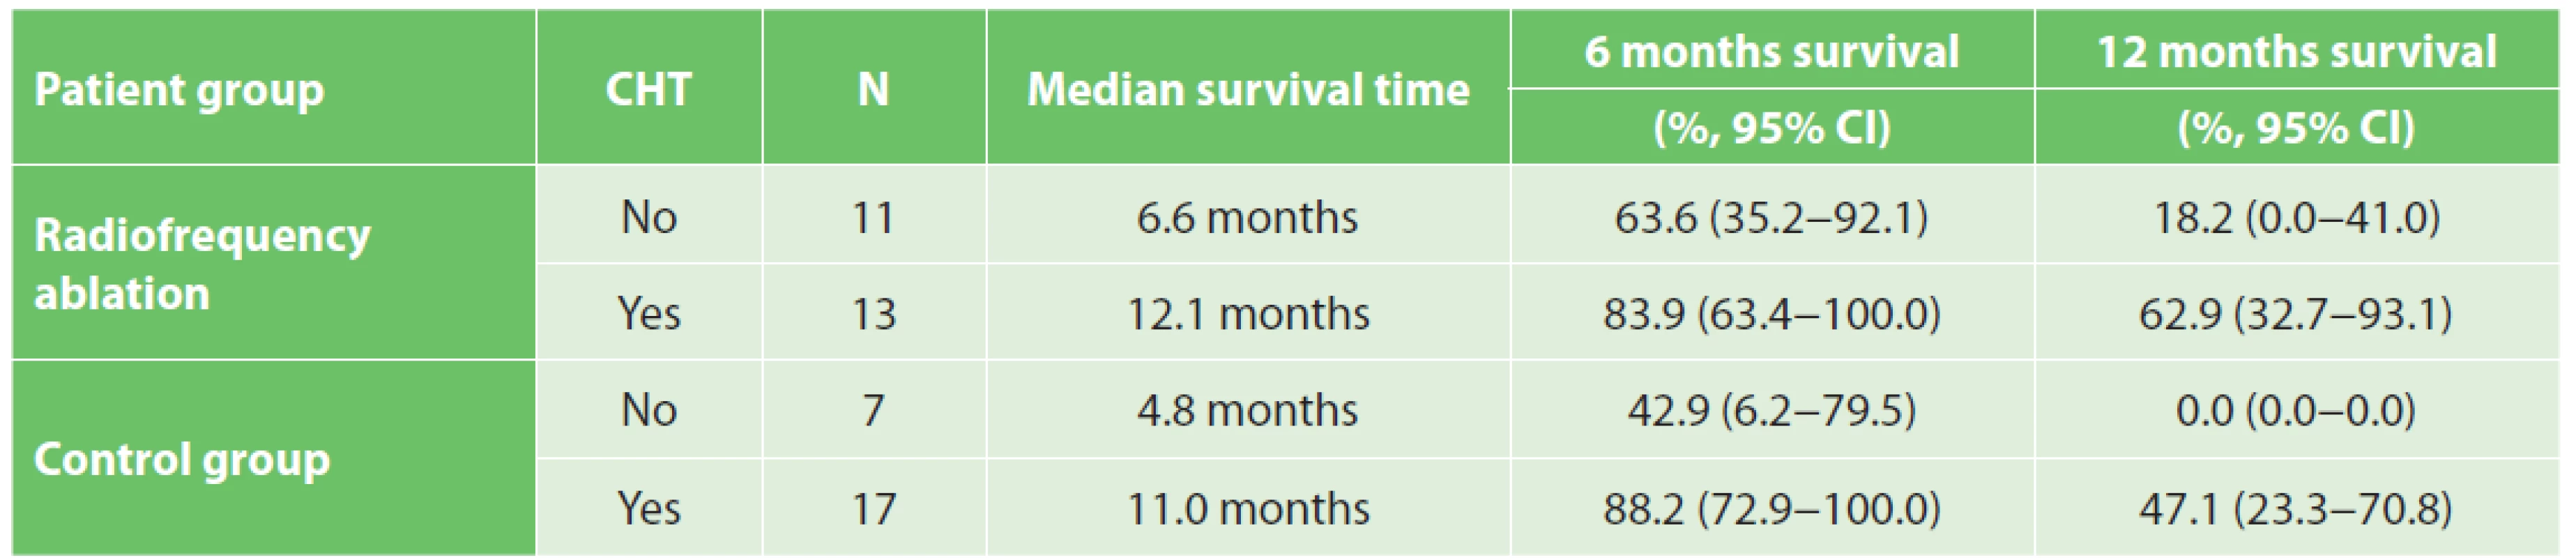 Median survival time and estimated probabilities of survival up to 6 and 12 months from the surgery in the RFA and
control groups in relation to adjuvant chemotherapy